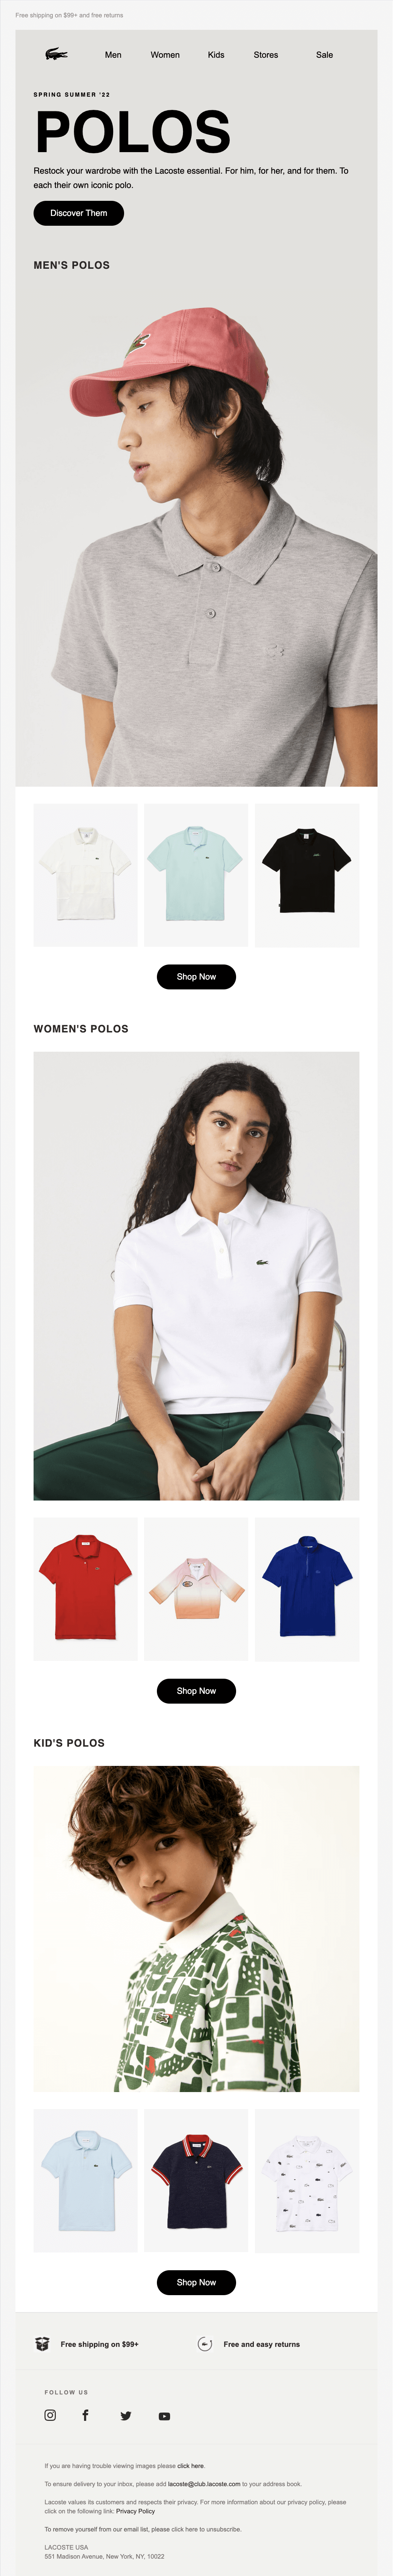 Inclusive email marketing campaign example by Lacoste